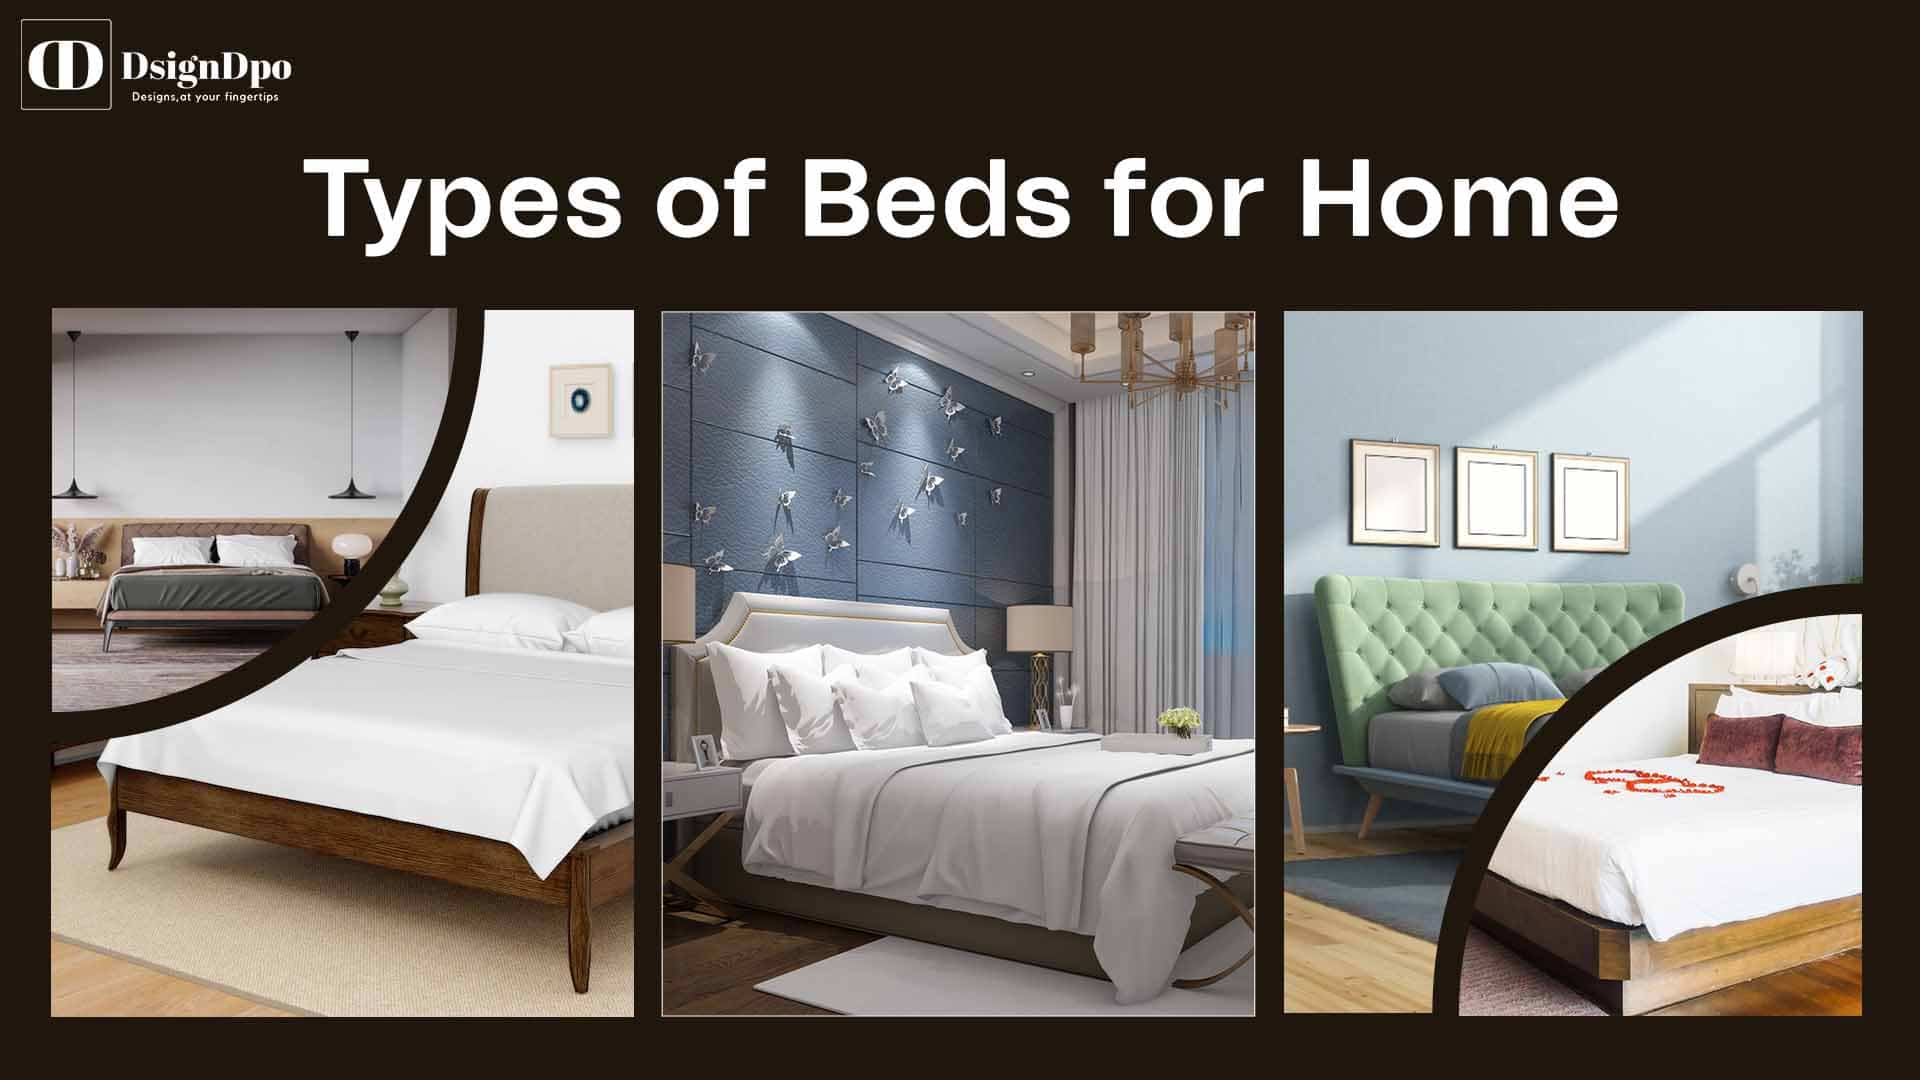 Types of Beds for Home